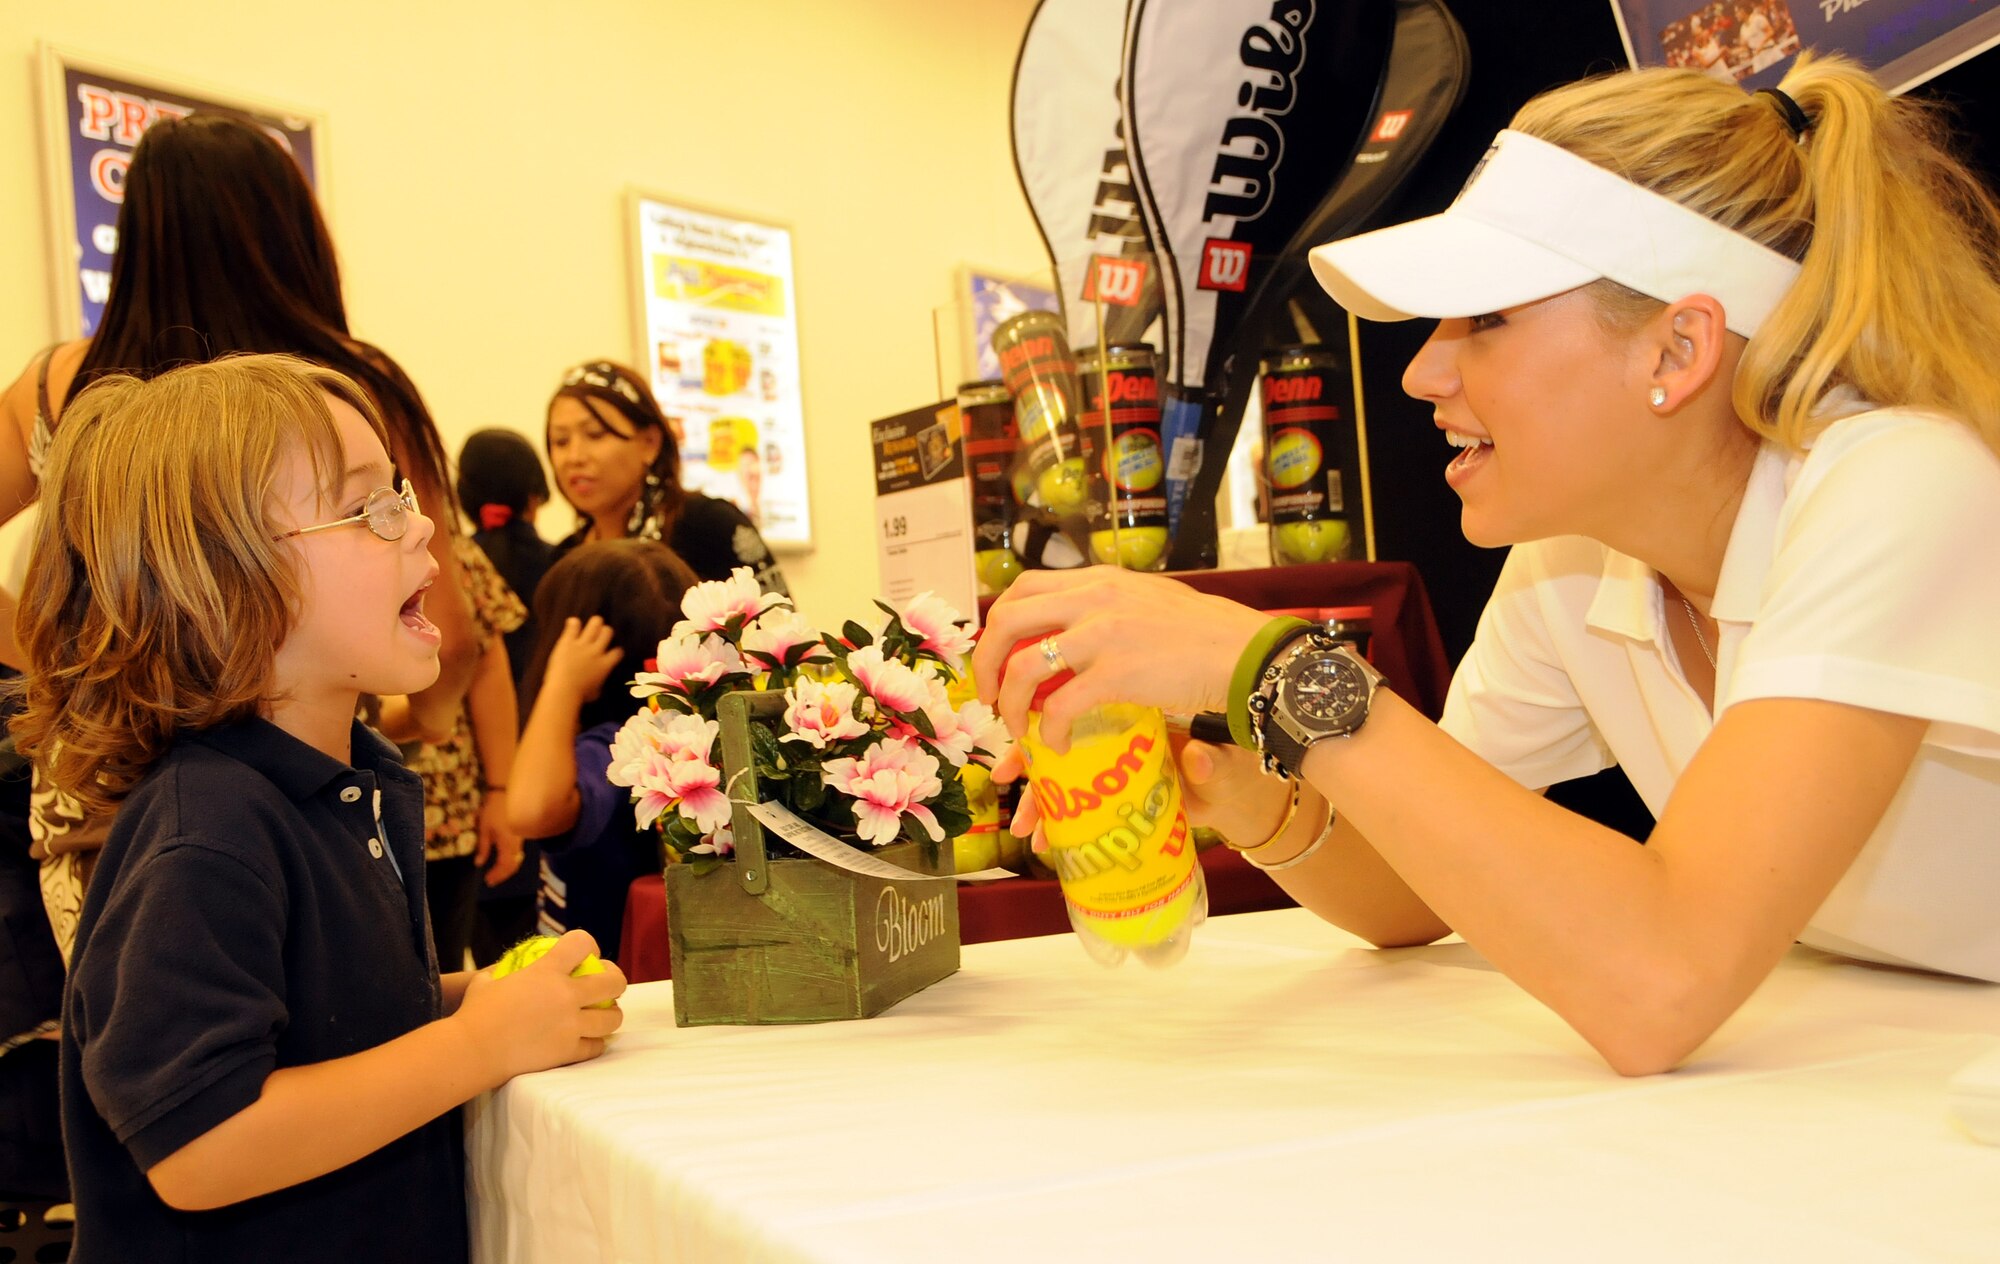 ANDERSEN AIR FORCE BASE, Guam - Anna Kournikova signs an autograph for six-year old Keegan Hart at a booth in the Base Exchange here Oct. 29. Keegan son of Tech. Sgt. Christopher Hart, 734th Air Mobility Squadron and Mrs. Jaye Hart thanks Ms. Kournikova for visitng the island. (U.S. Air Force photo by Airman 1st Class Courtney Witt)
